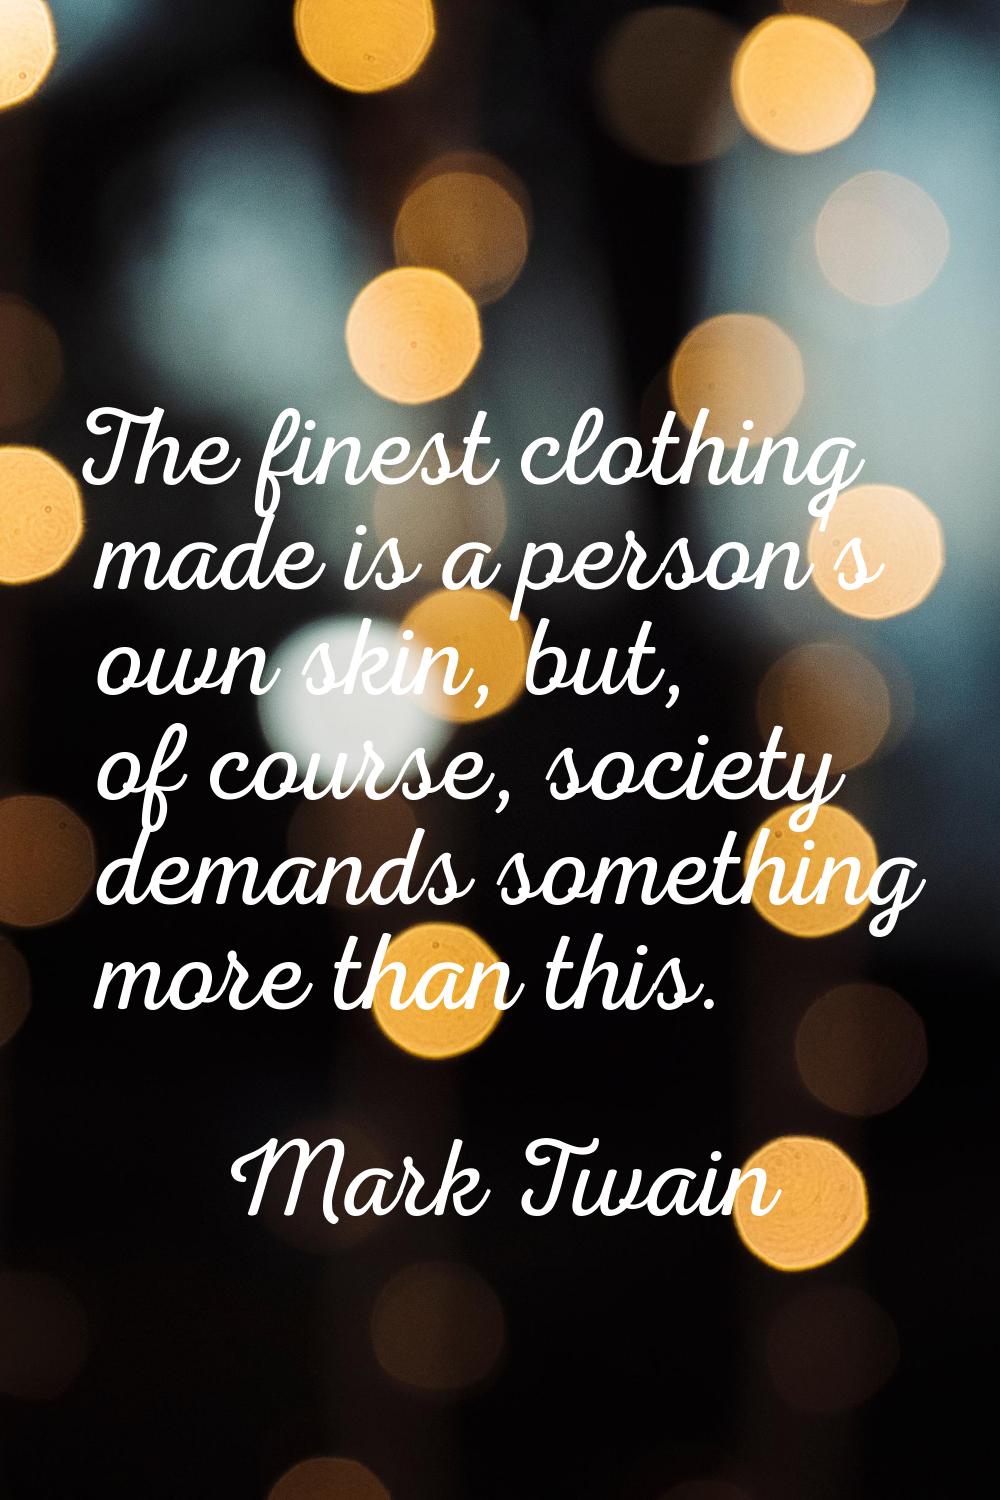 The finest clothing made is a person's own skin, but, of course, society demands something more tha